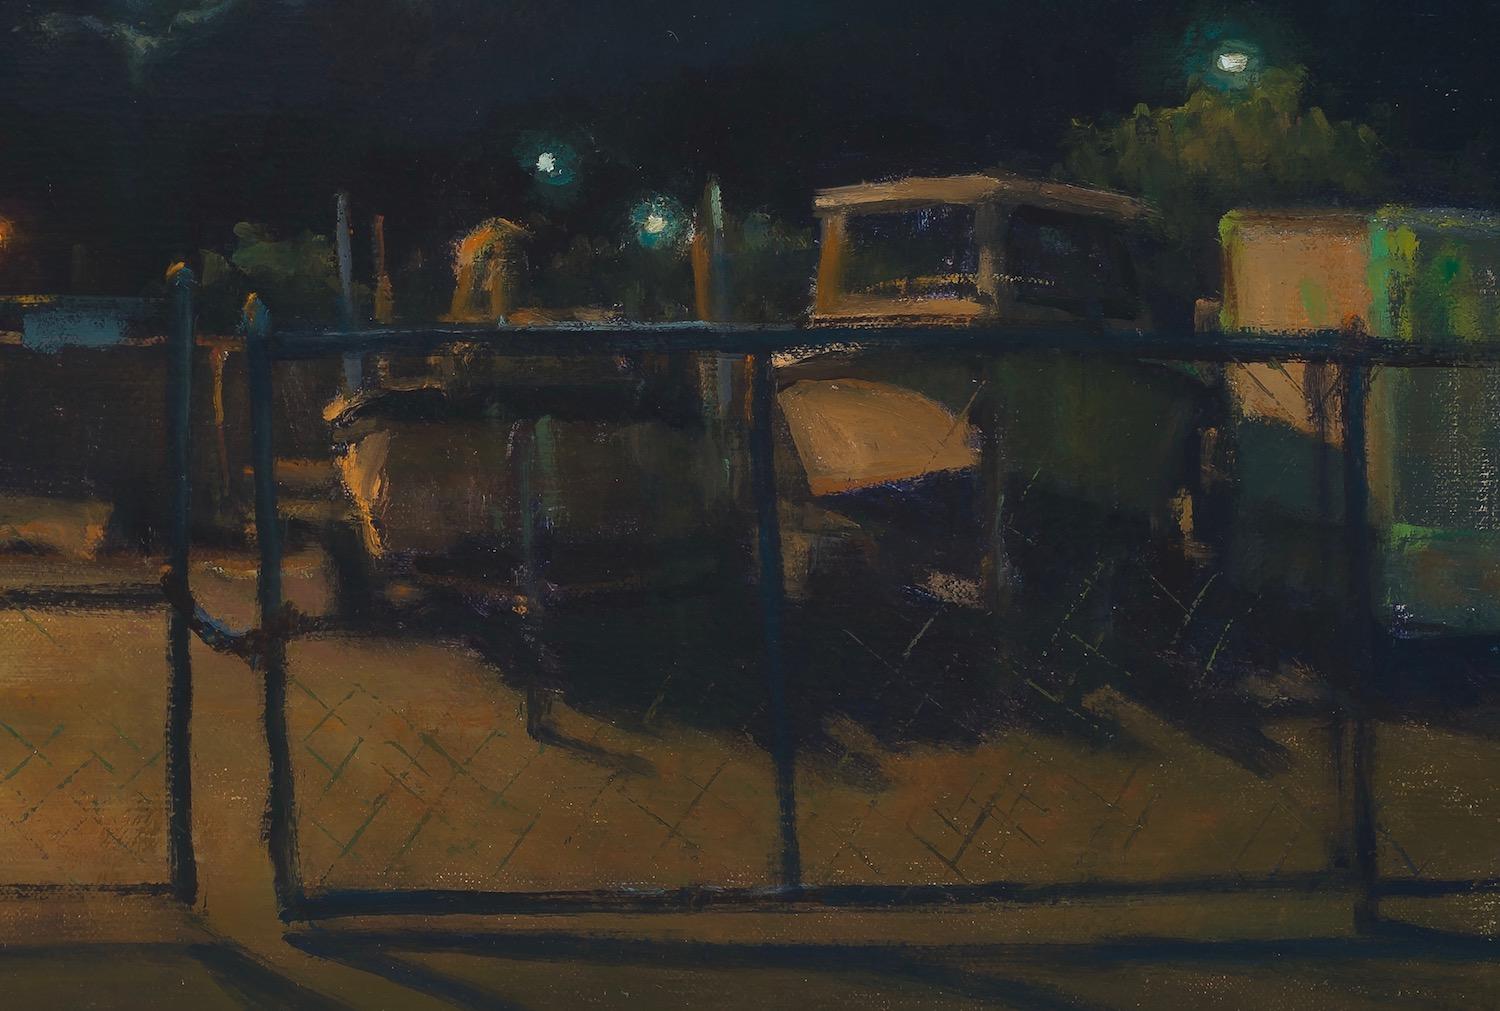 Moon Over Back Lot - American Realist Painting by Carl Bretzke